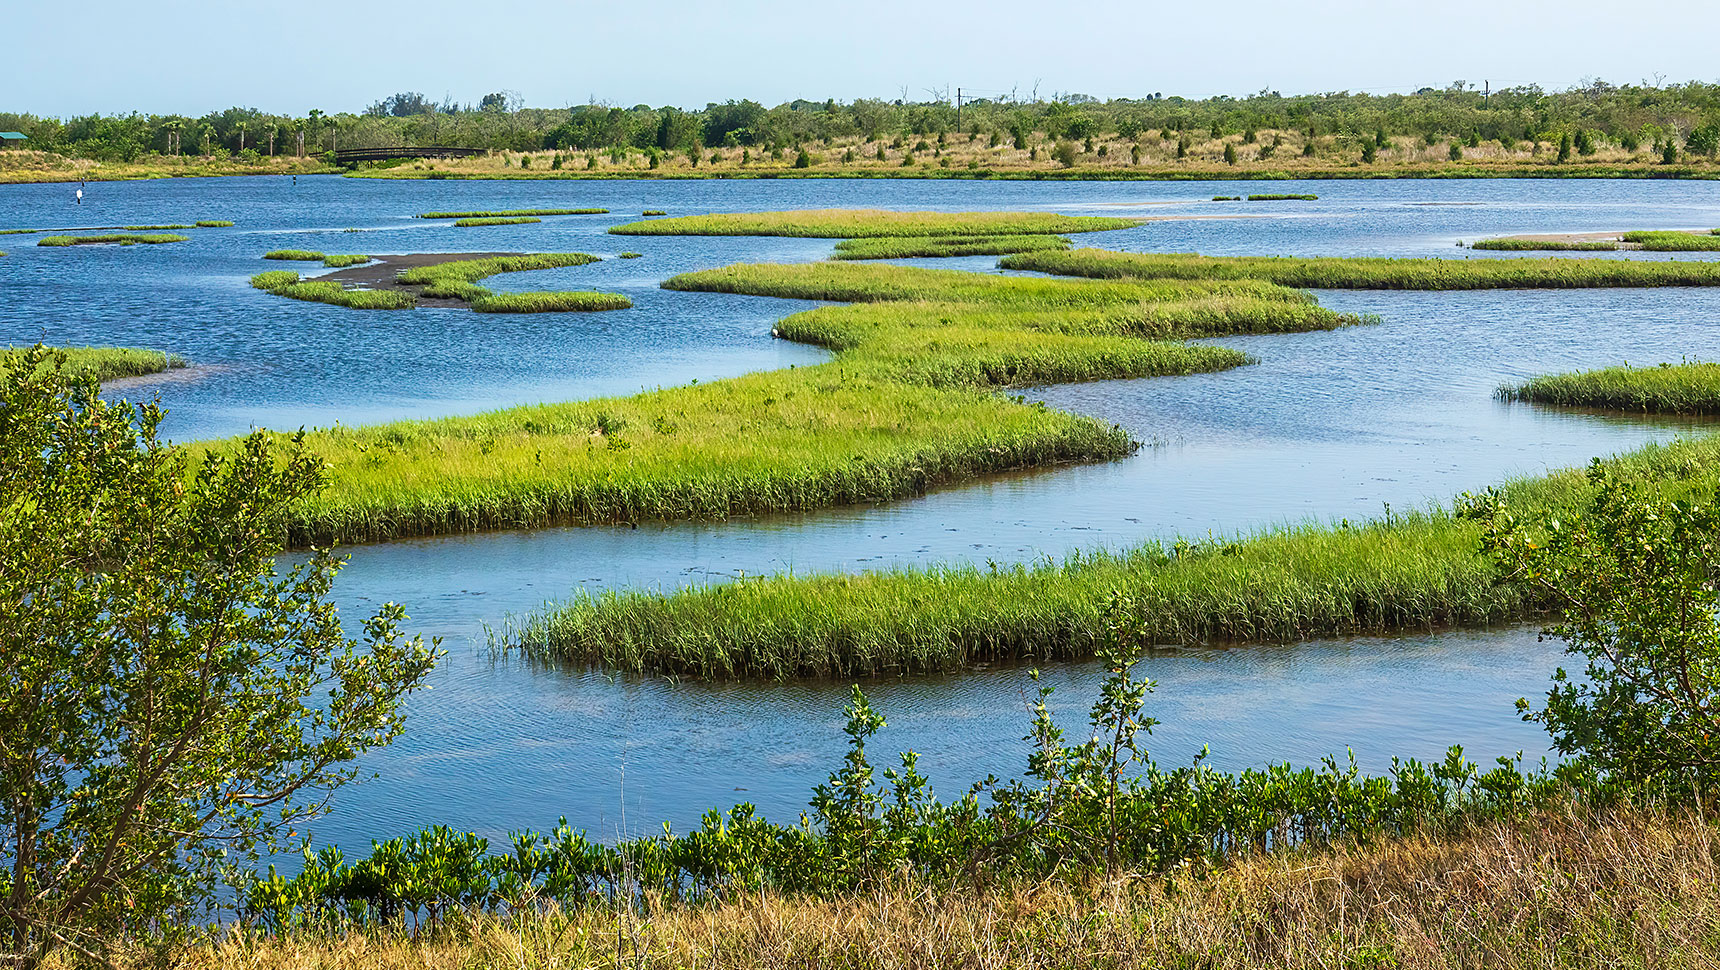 View of a marsh